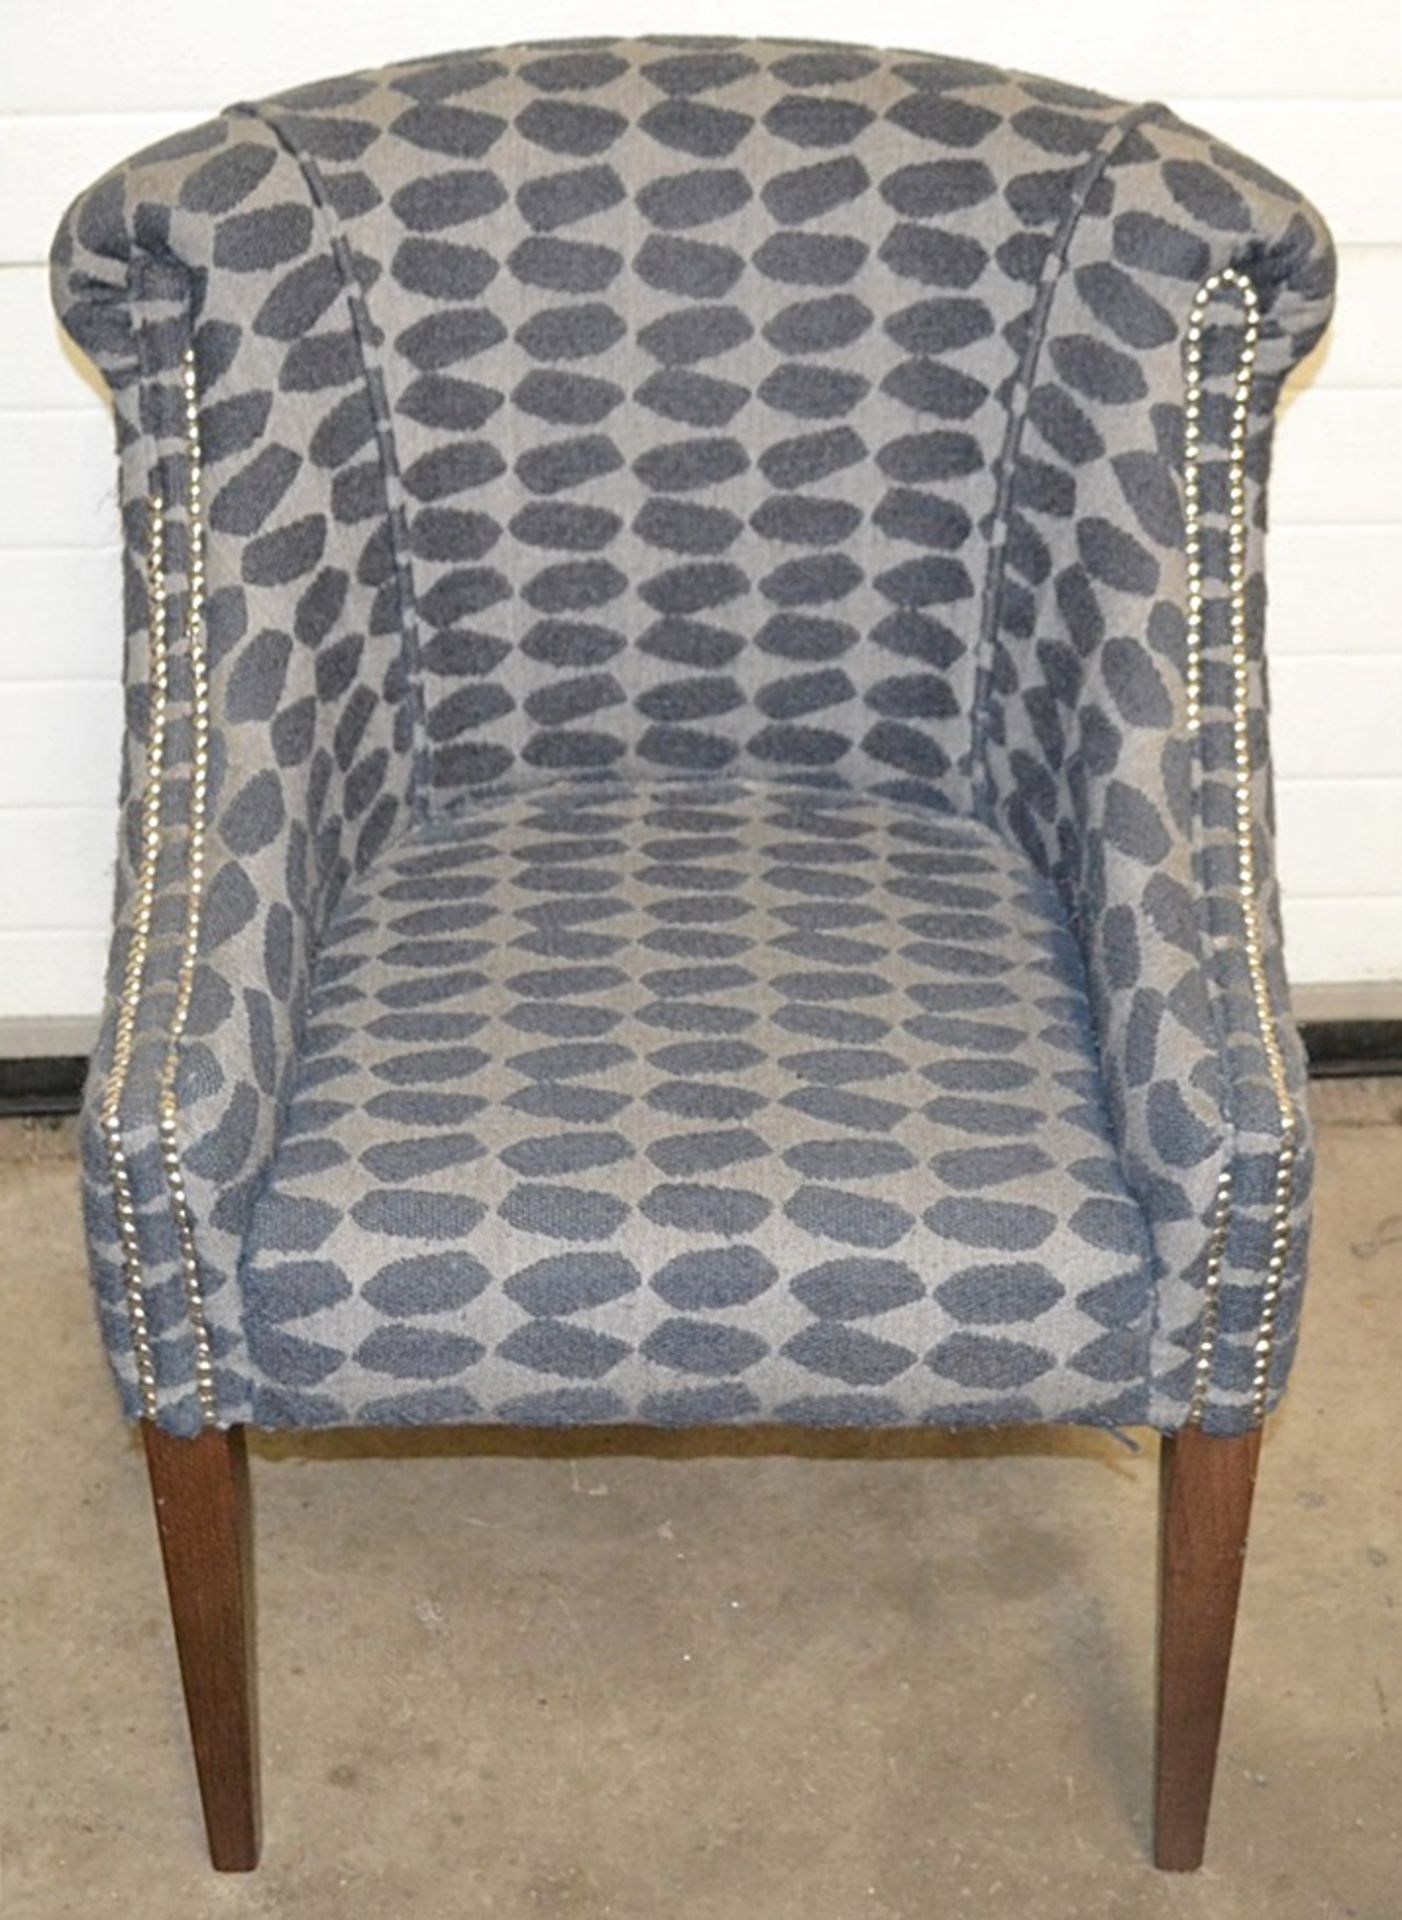 4 x Blue & Grey Upholstered Bar Chairs For Commercial Use - Dimensions (cm): W70 x D60, Back